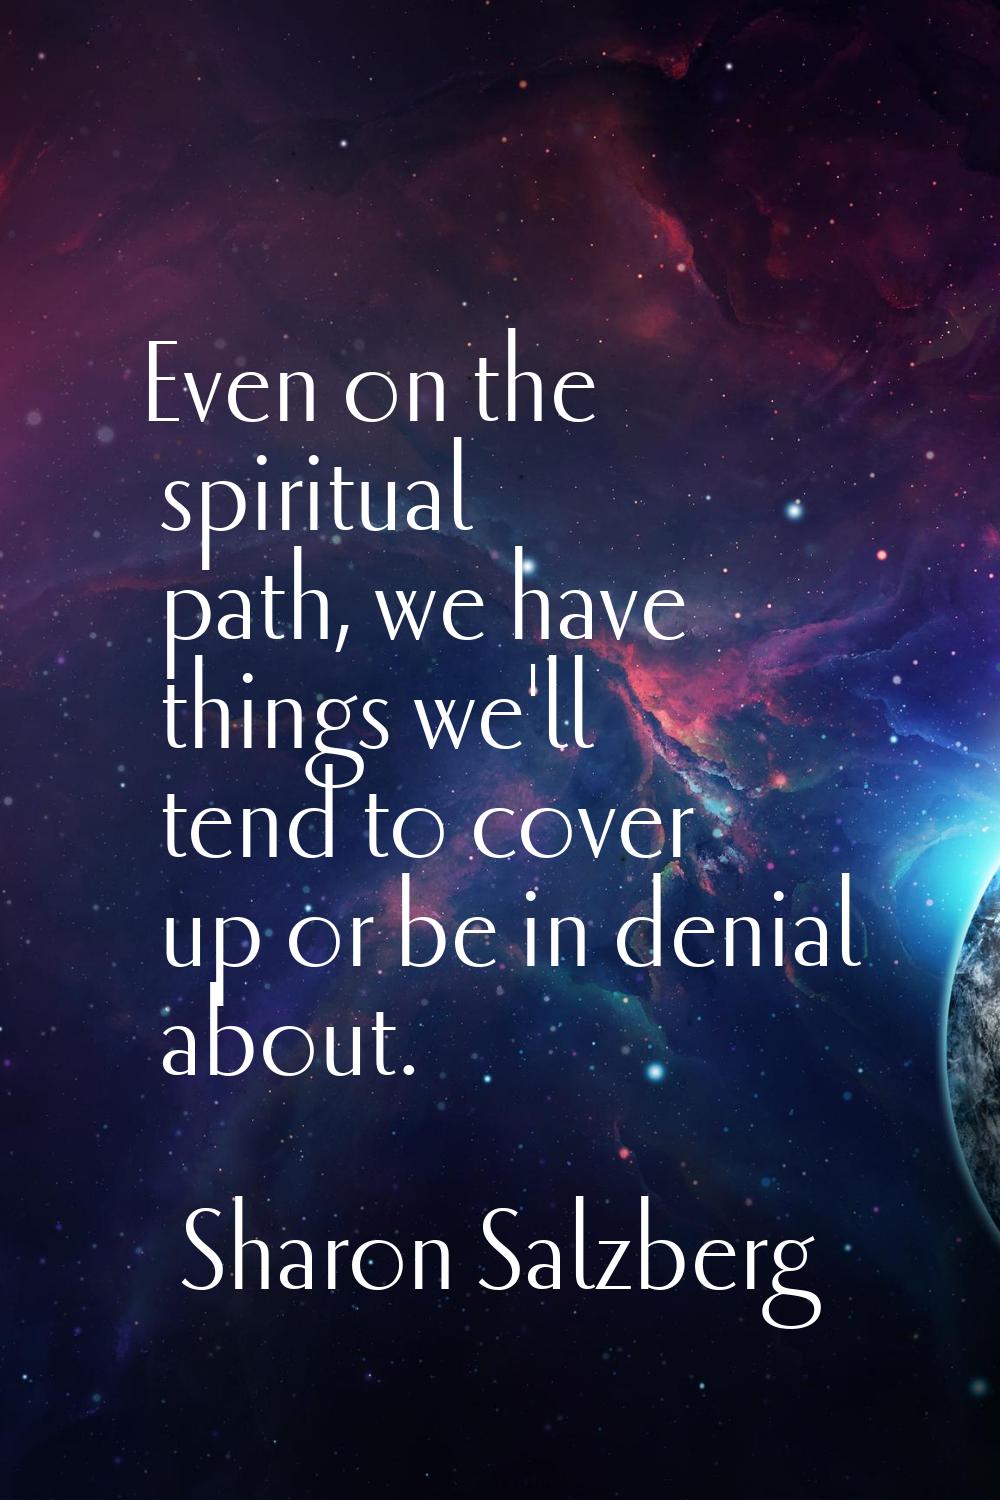 Even on the spiritual path, we have things we'll tend to cover up or be in denial about.